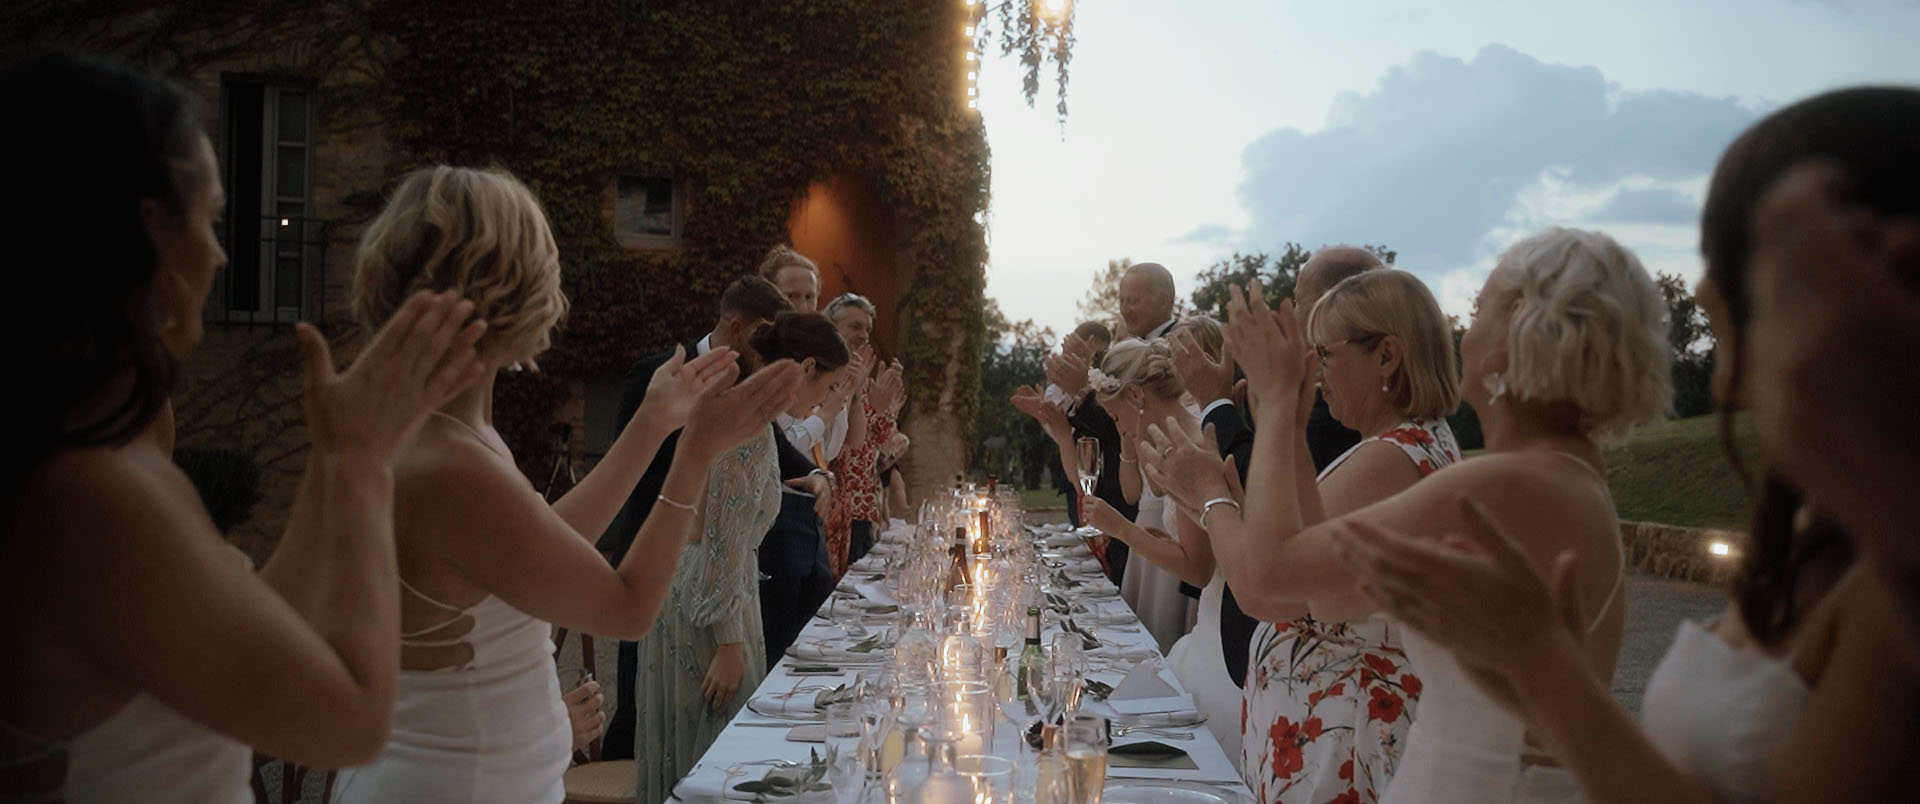 wedding diner in italy